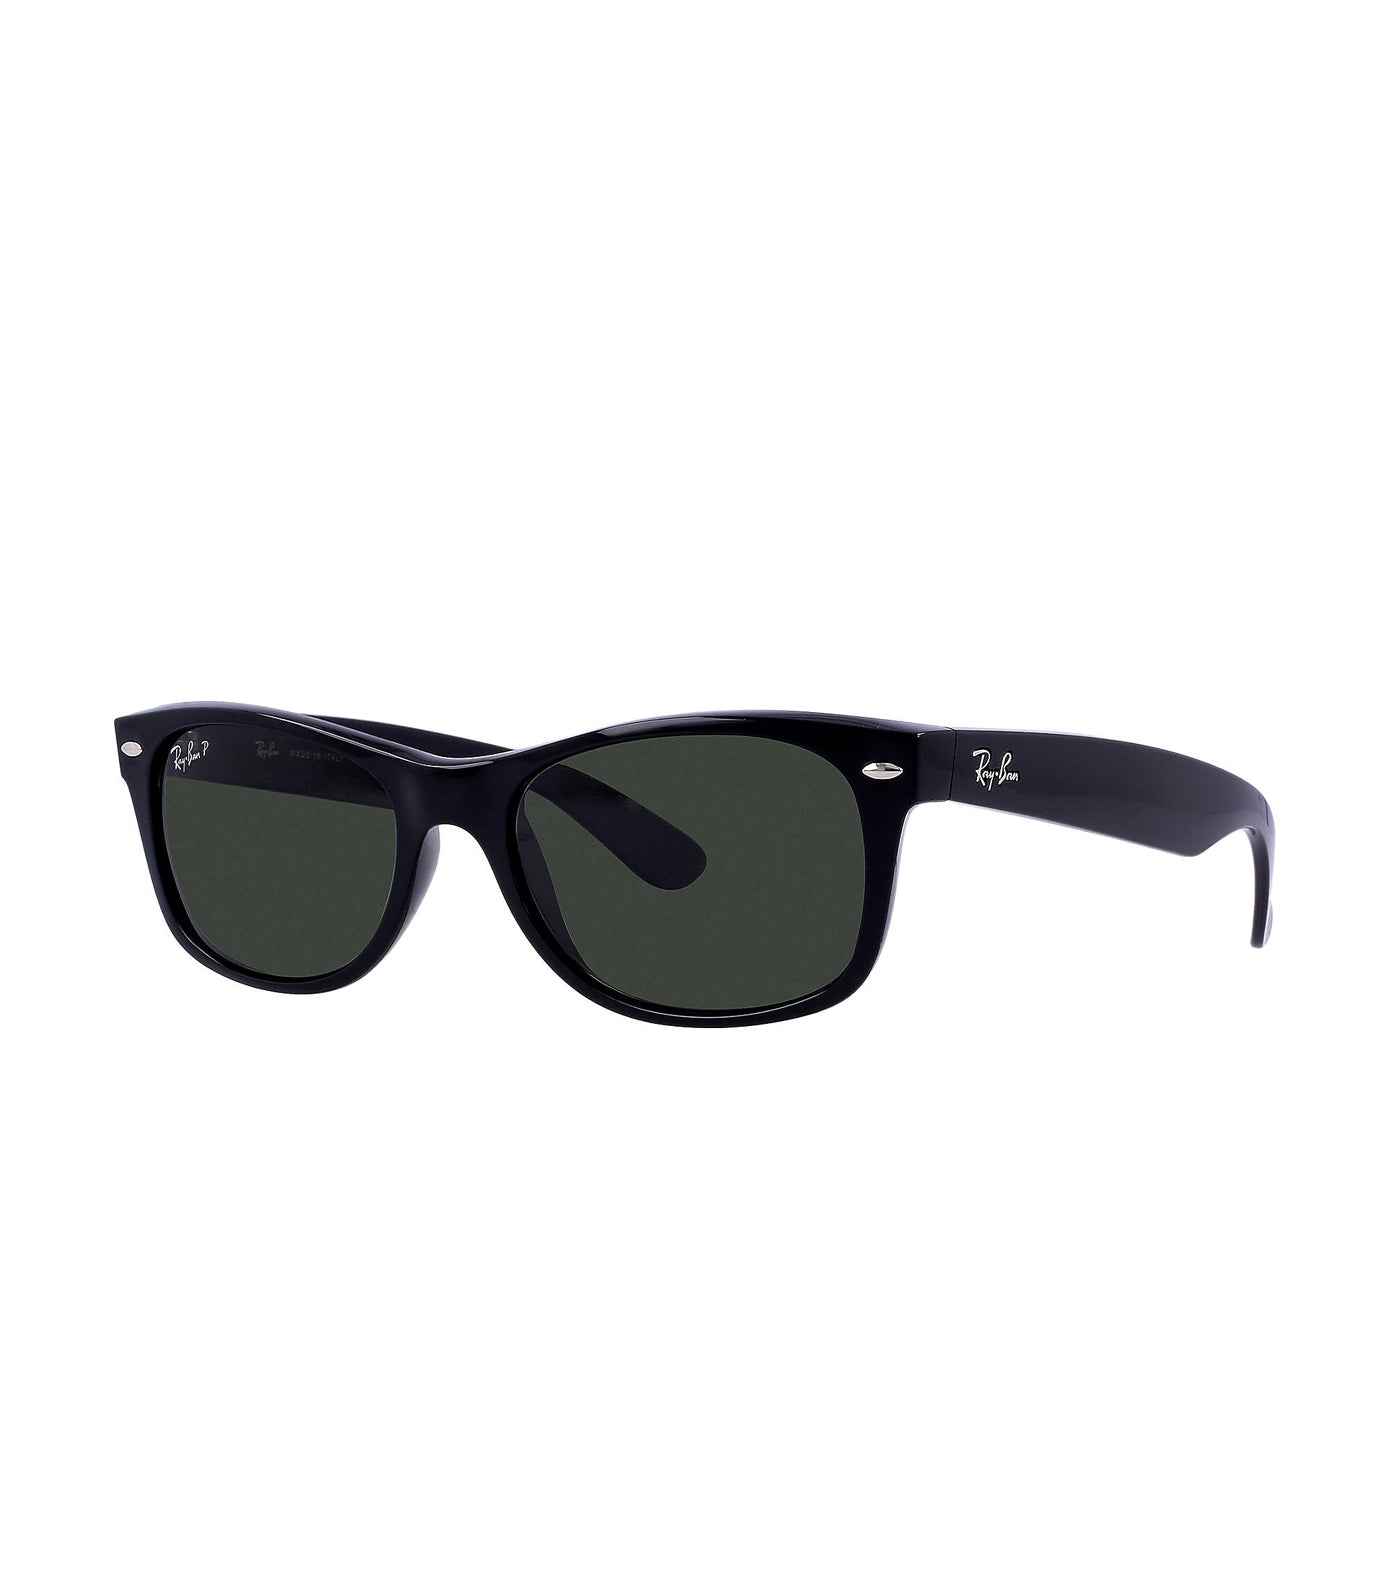 Classic Ray-Ban Black Wayfarer Sunglasses RB2140 w/ Case & Cleaning Cl –  DMND Limited